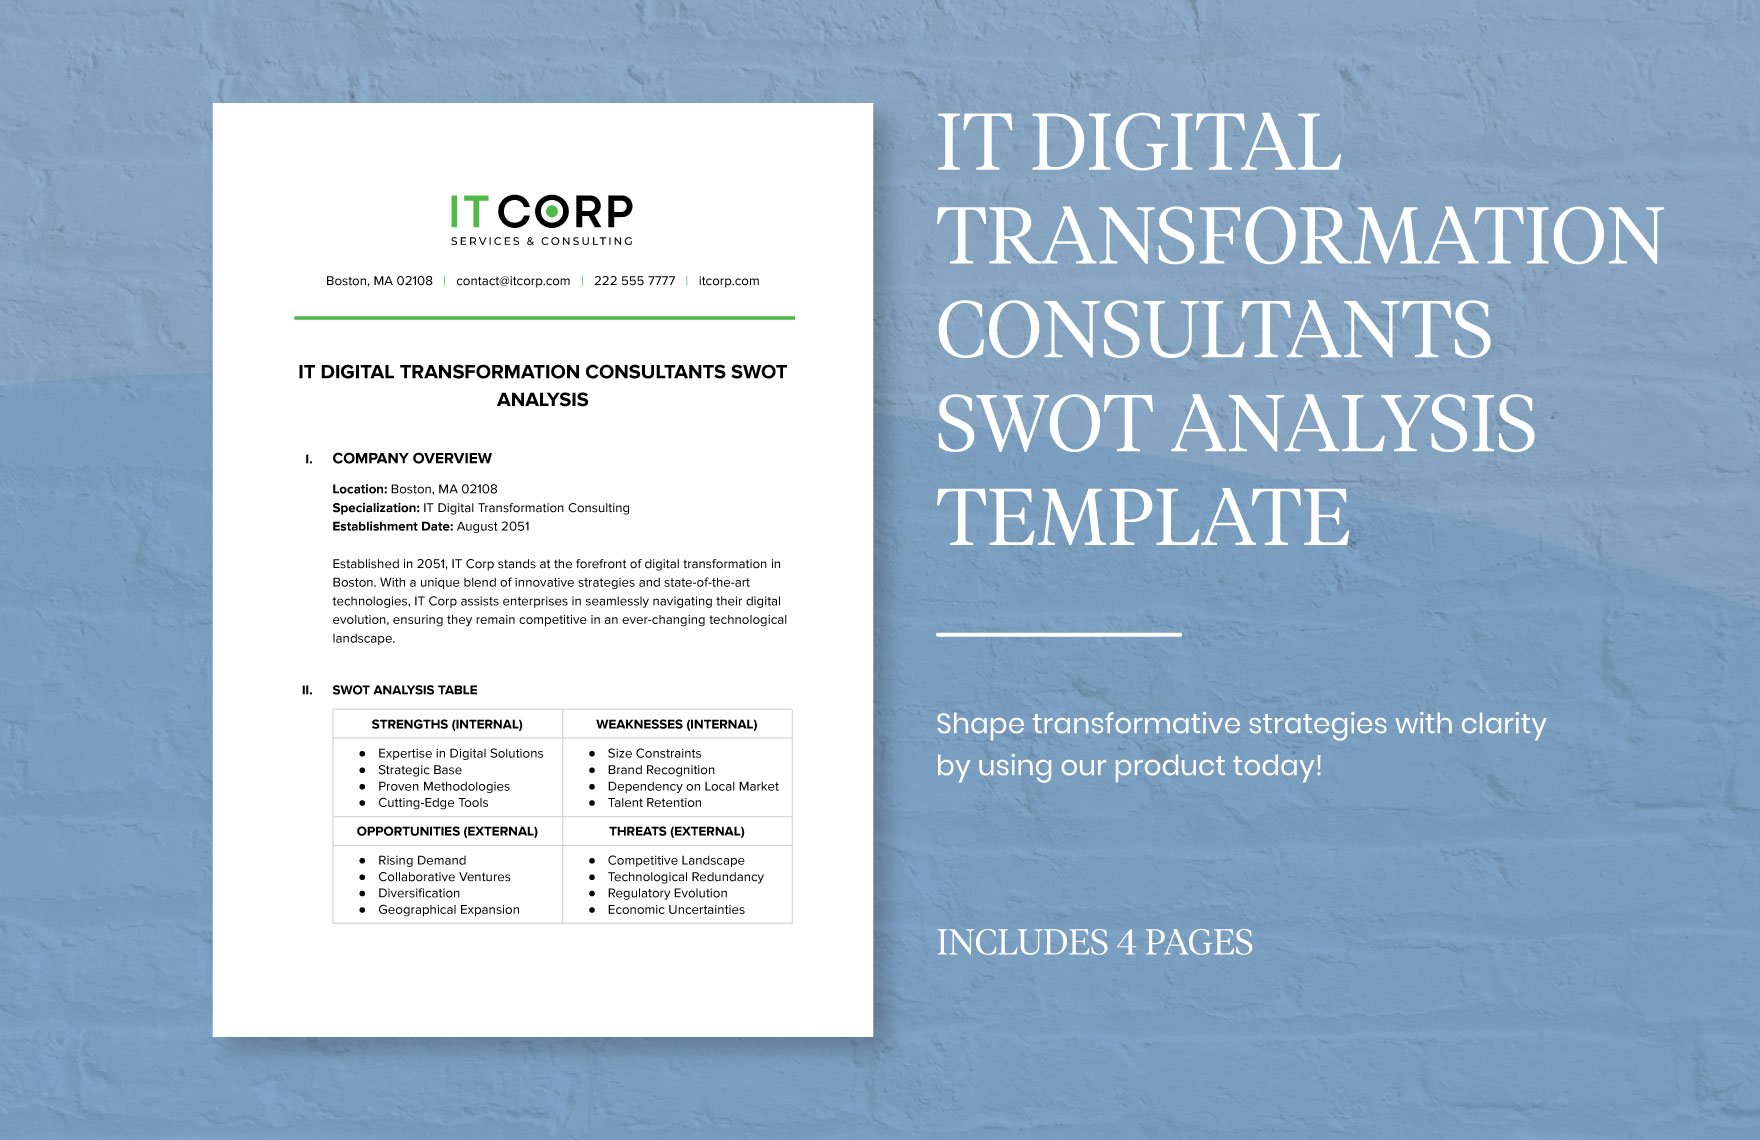 IT Digital Transformation Consultants SWOT Analysis Template